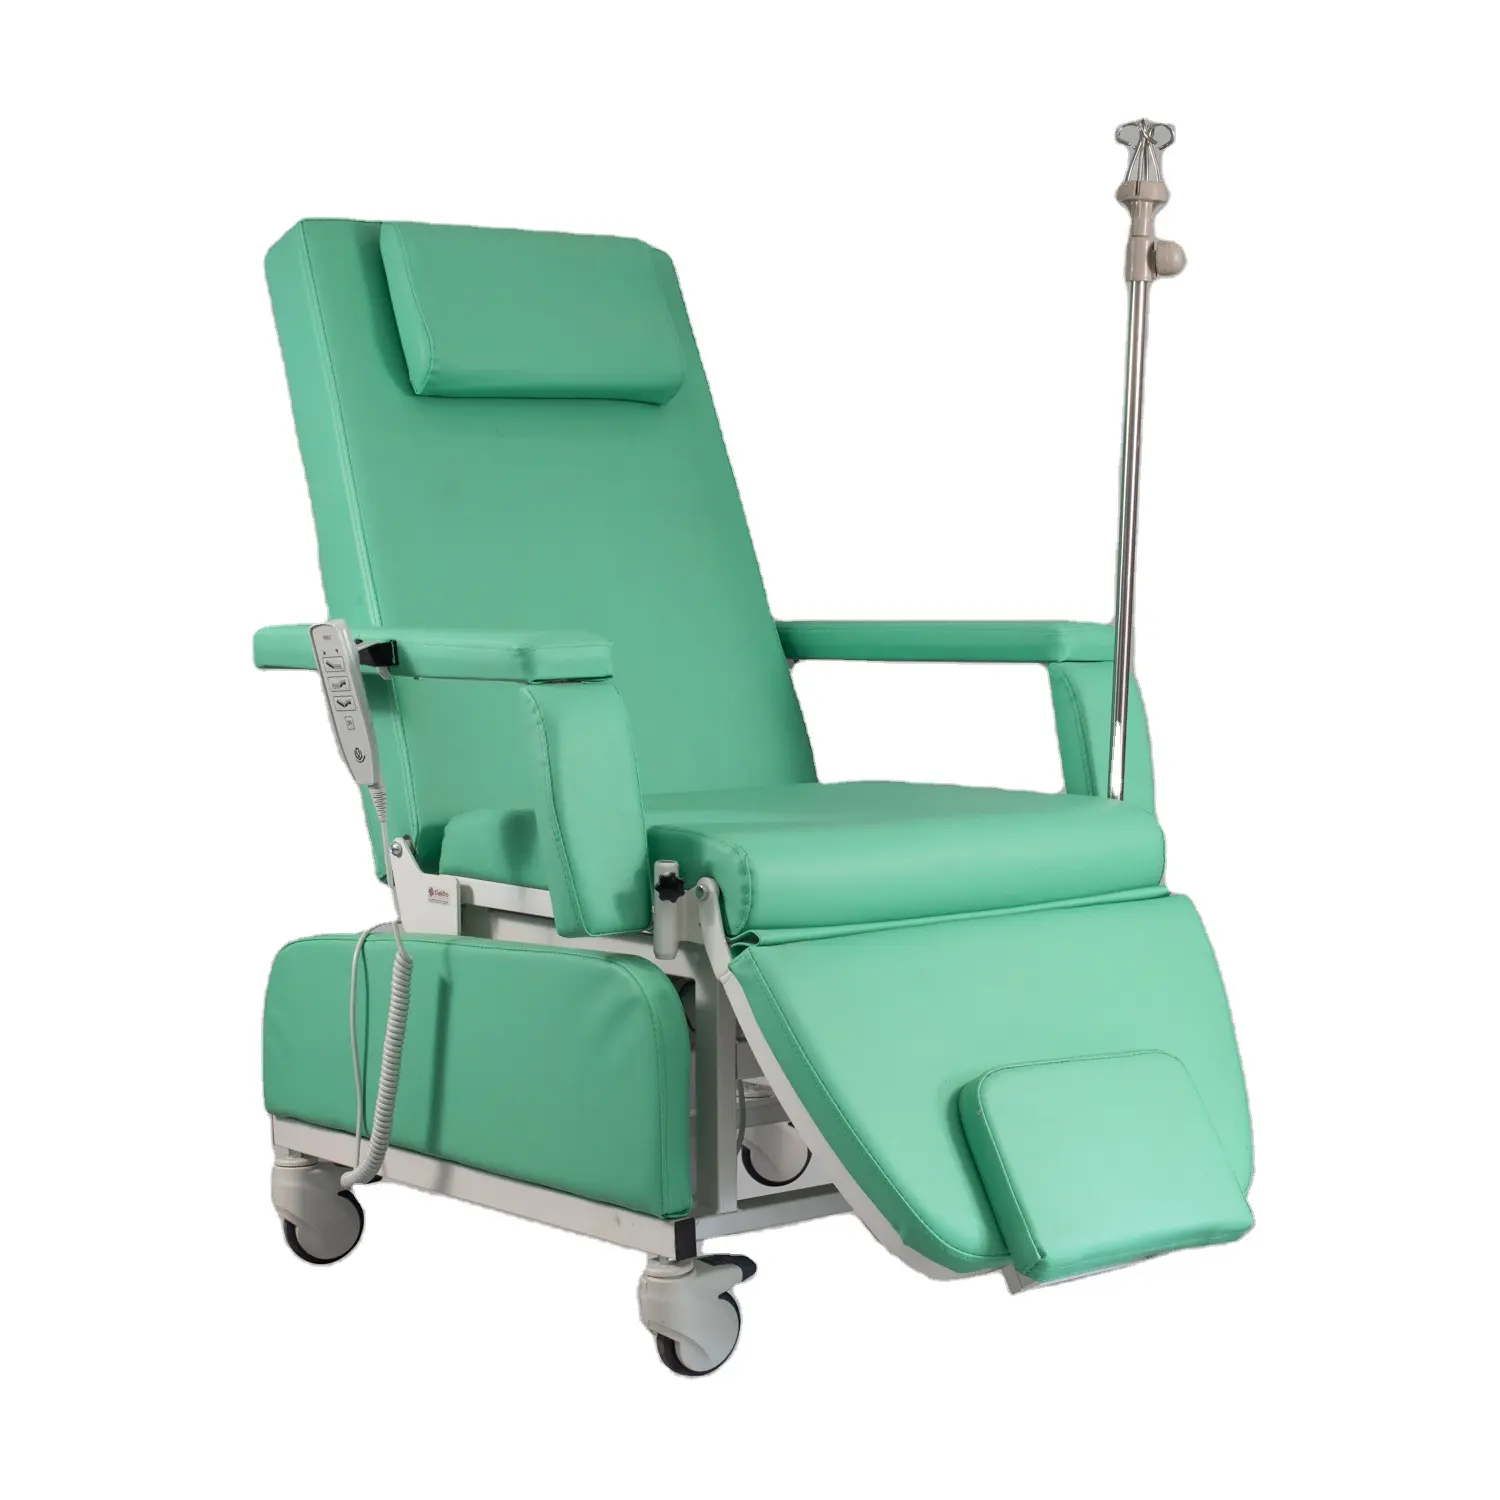 Gute elektrische Dialyse Chemo therapie Blutbank Spendens ammlung Stuhl Preis Medical Hospital Clinic 3 Motor Infusion Chair